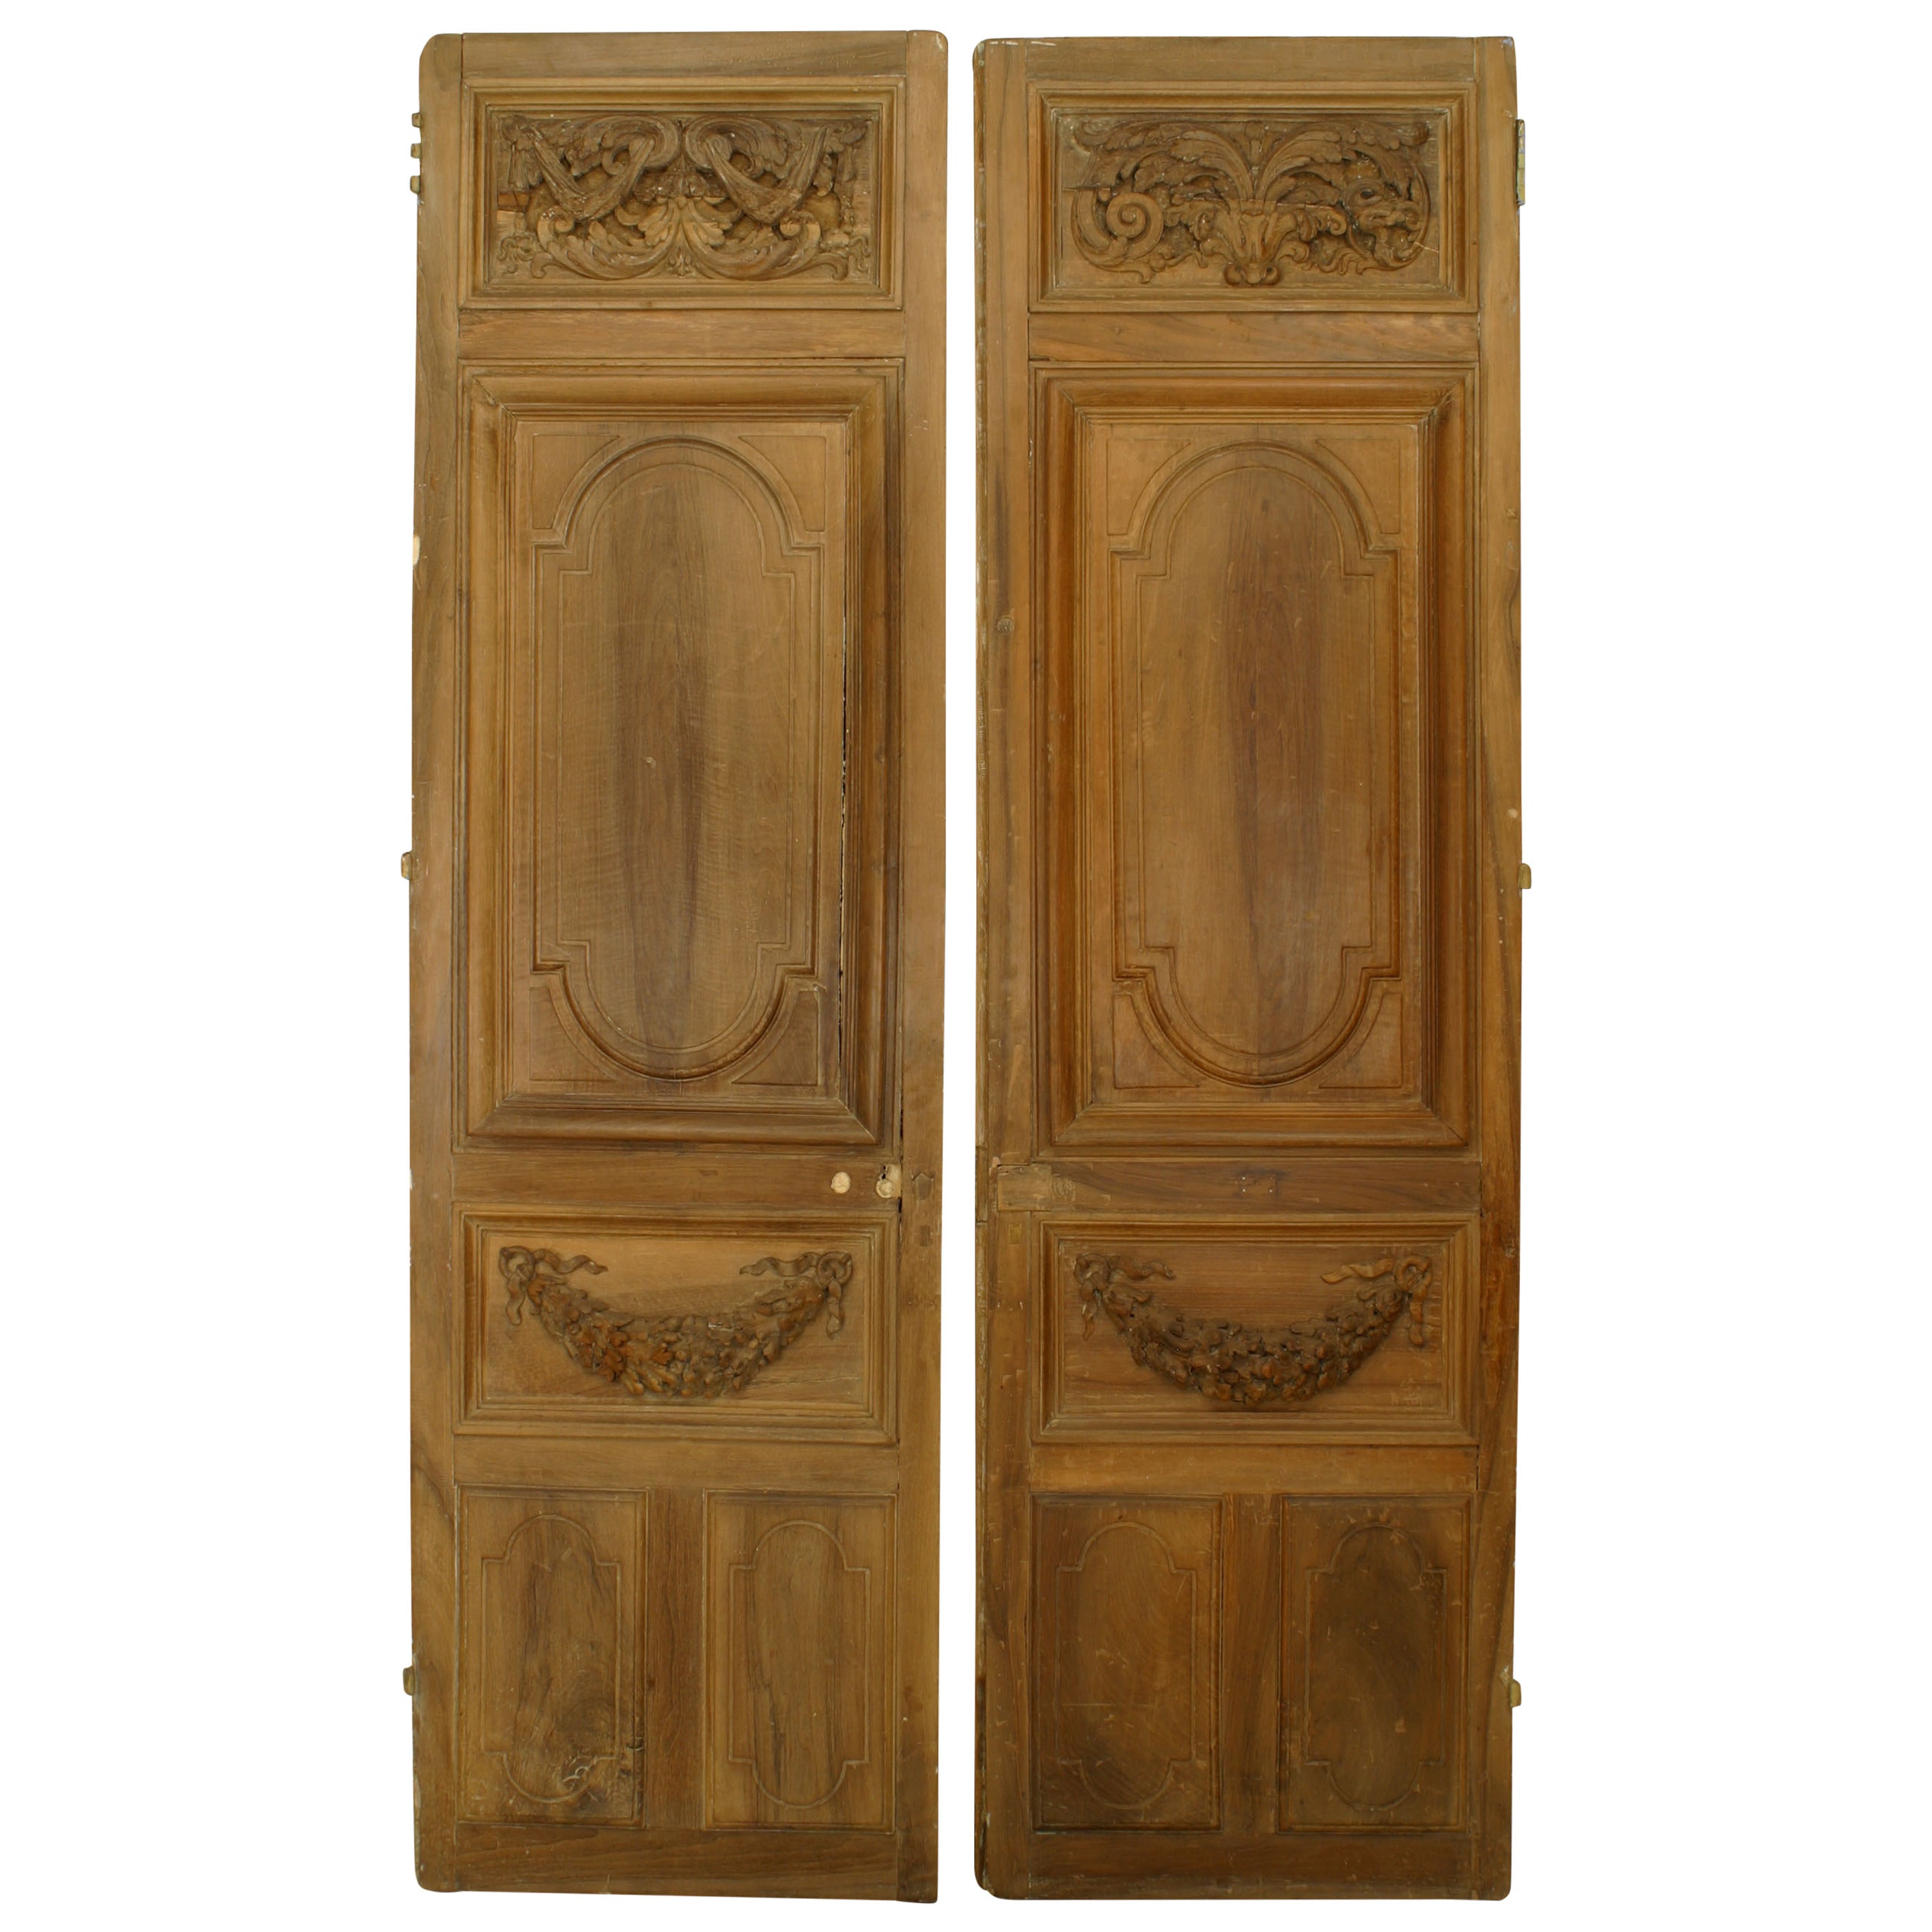 Pair of French Carved Wood Doors